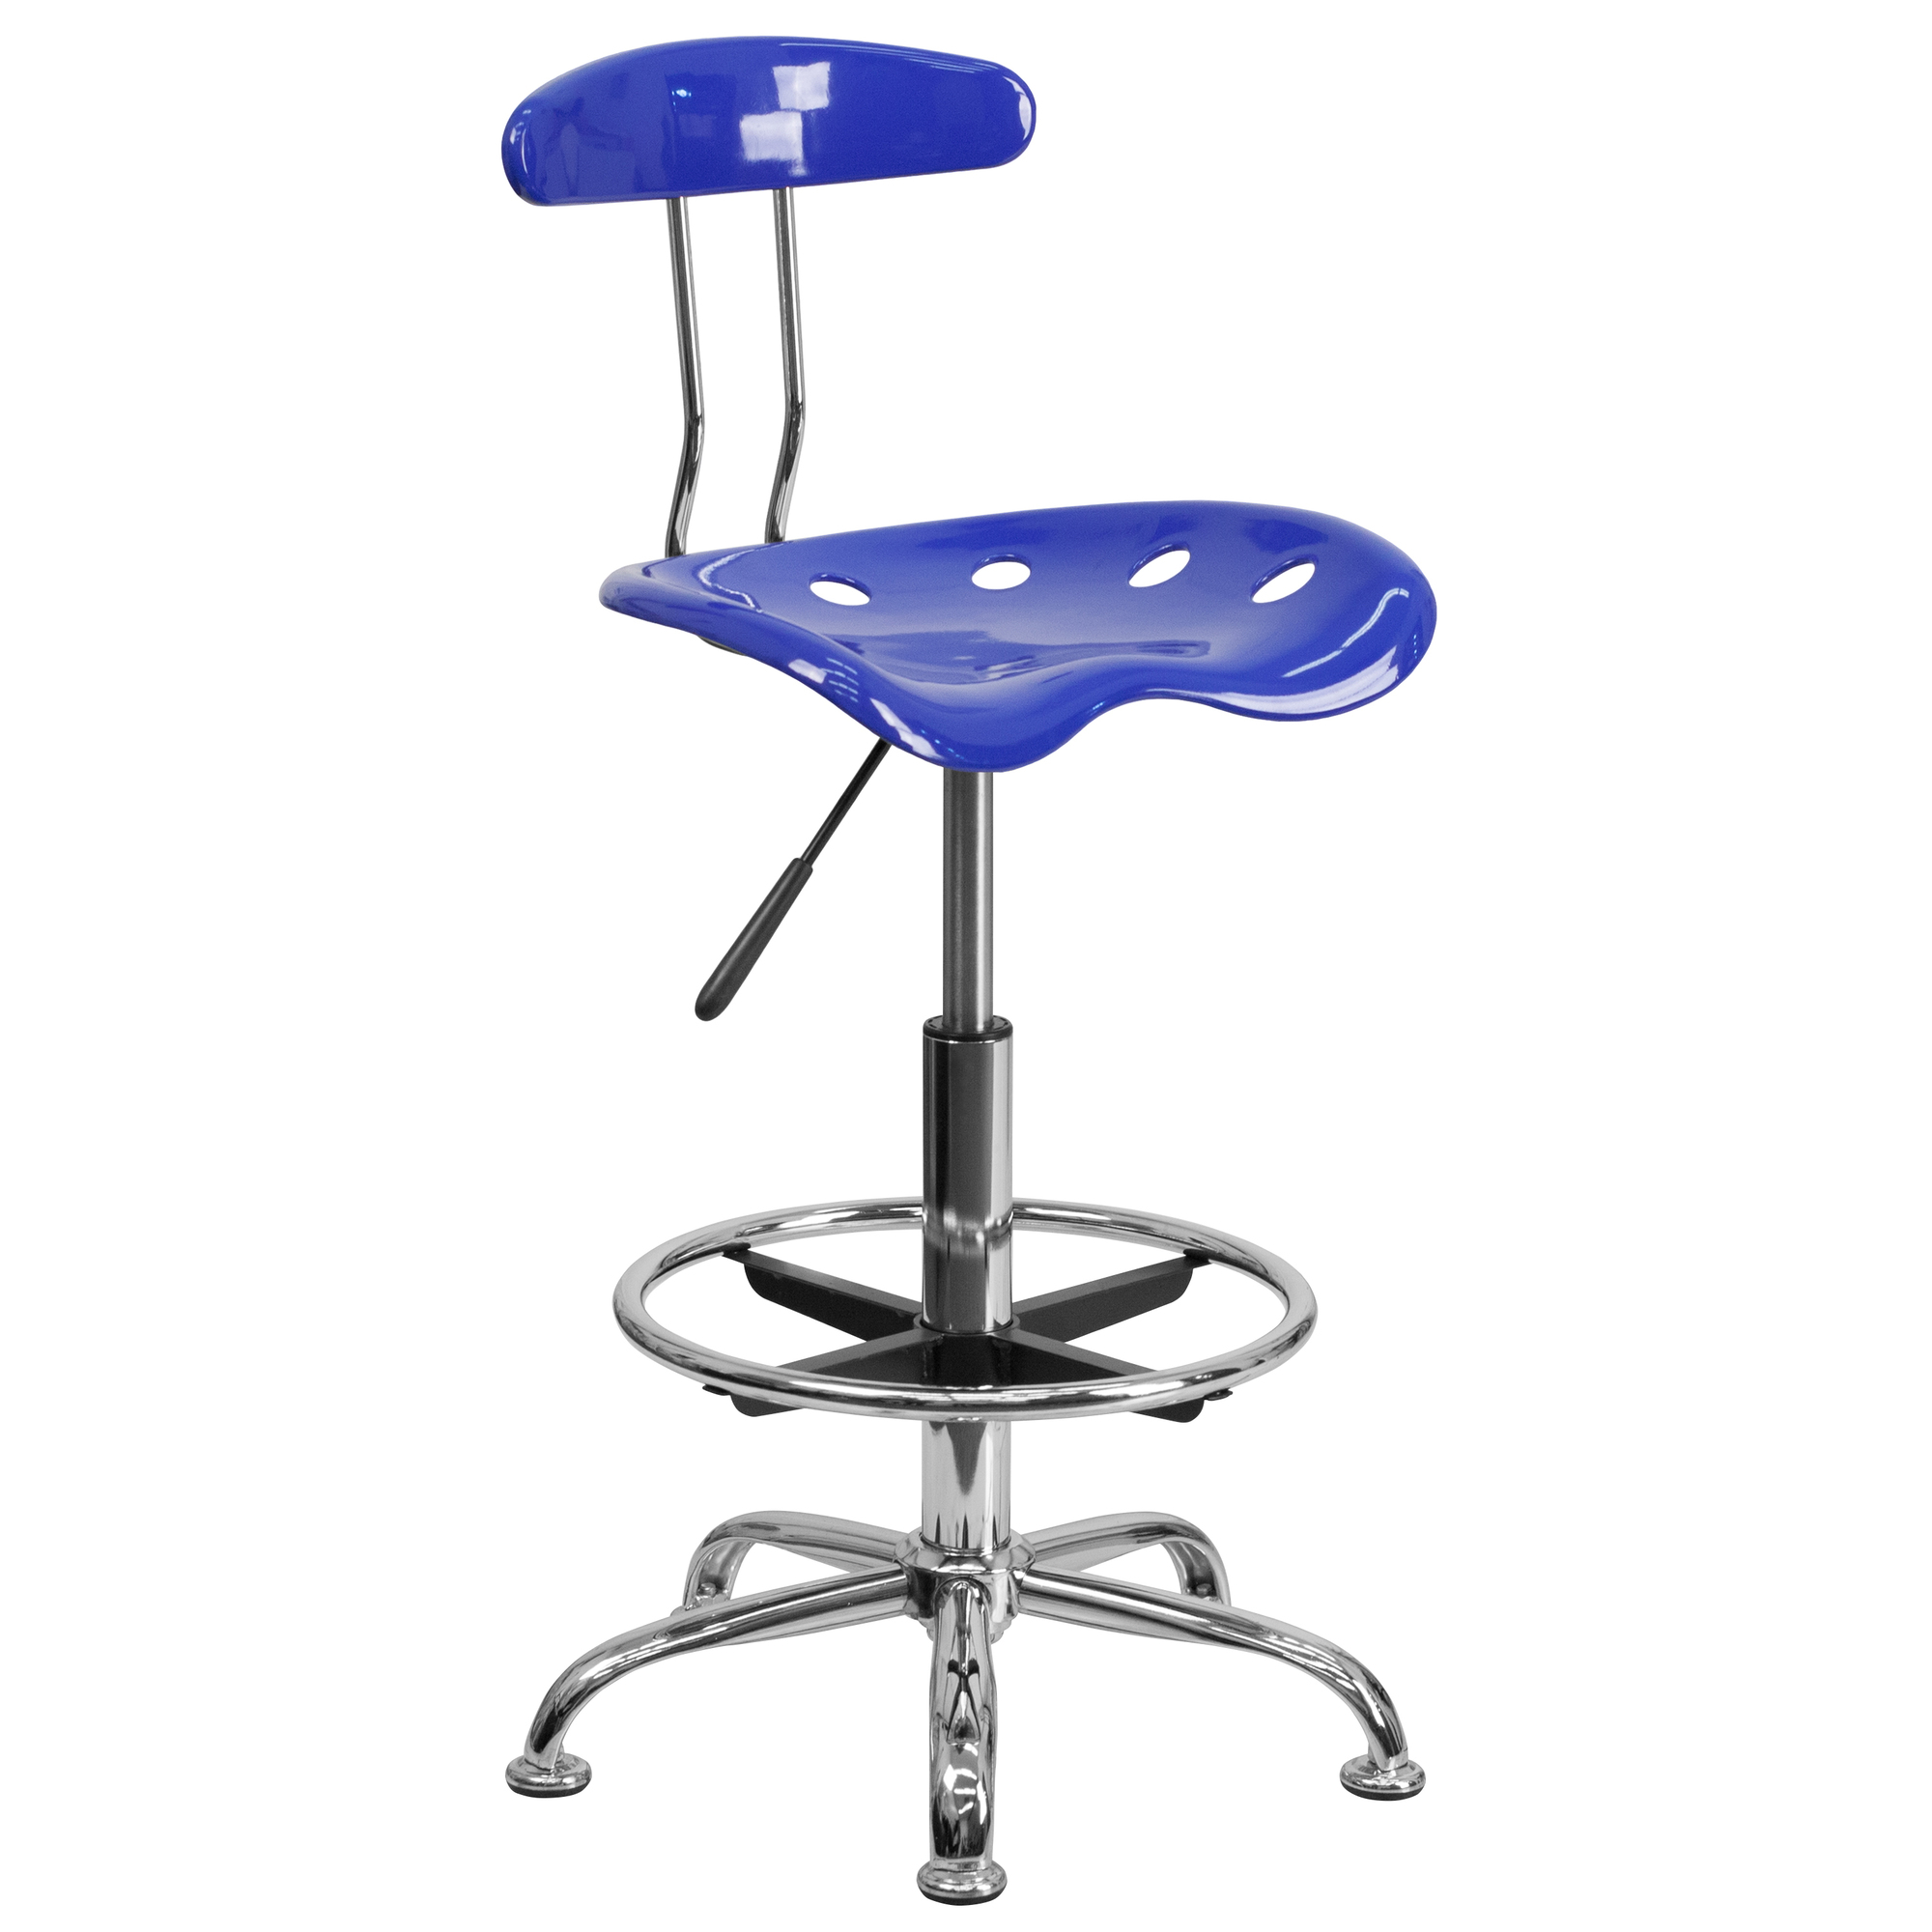 Vibrant Nautical Blue and Chrome Drafting Stool, Primary Color Blue, Included (qty.) 1, Model - Flash Furniture LF215NTCLBLUE